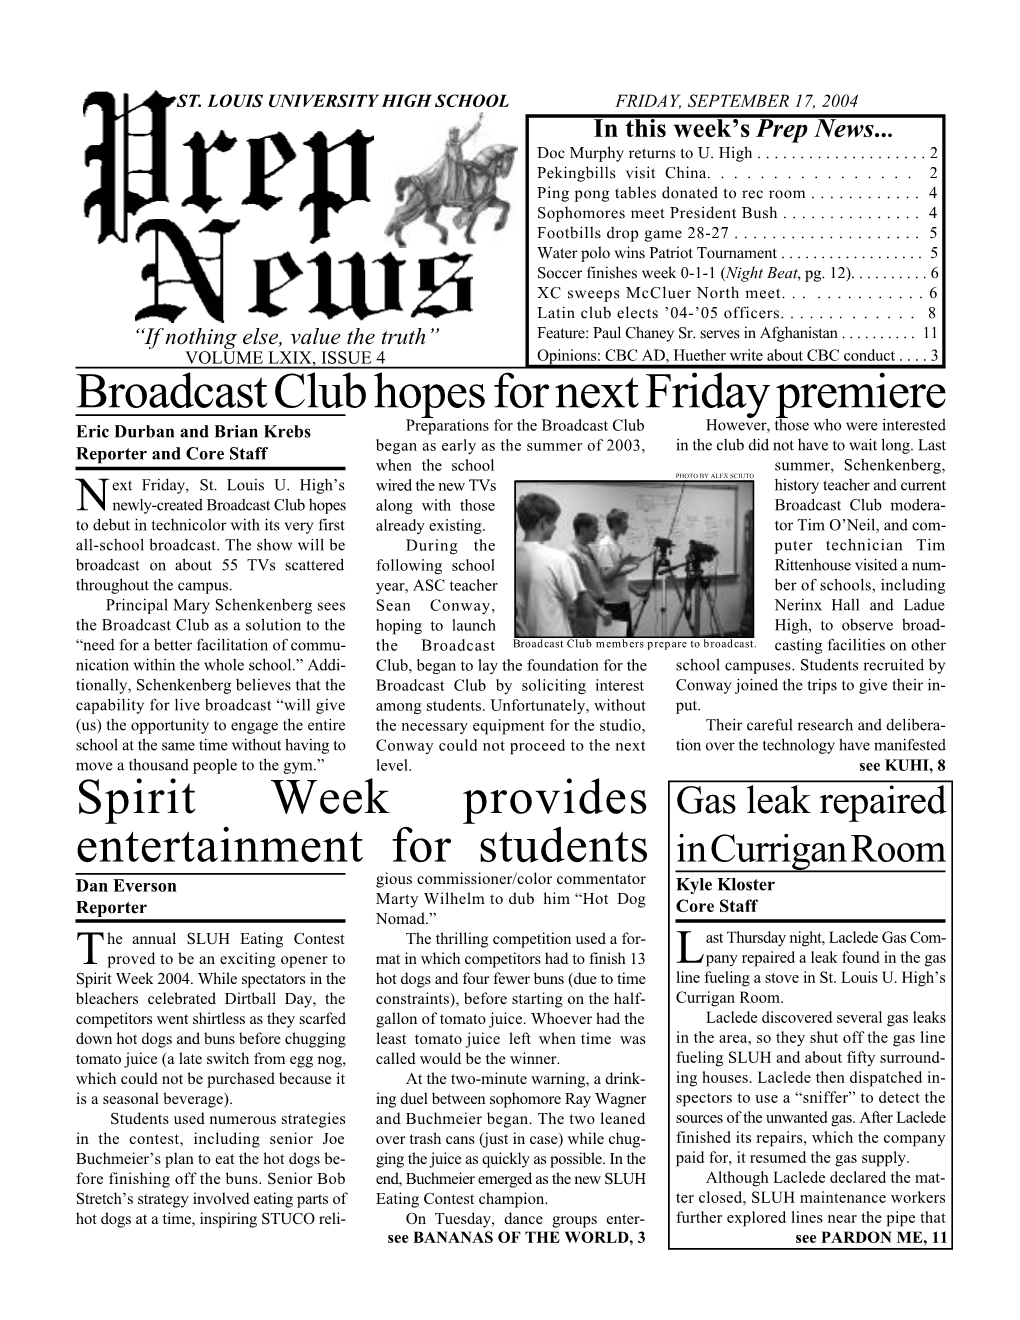 Broadcast Club Hopes for Next Friday Premiere Spirit Week Provides